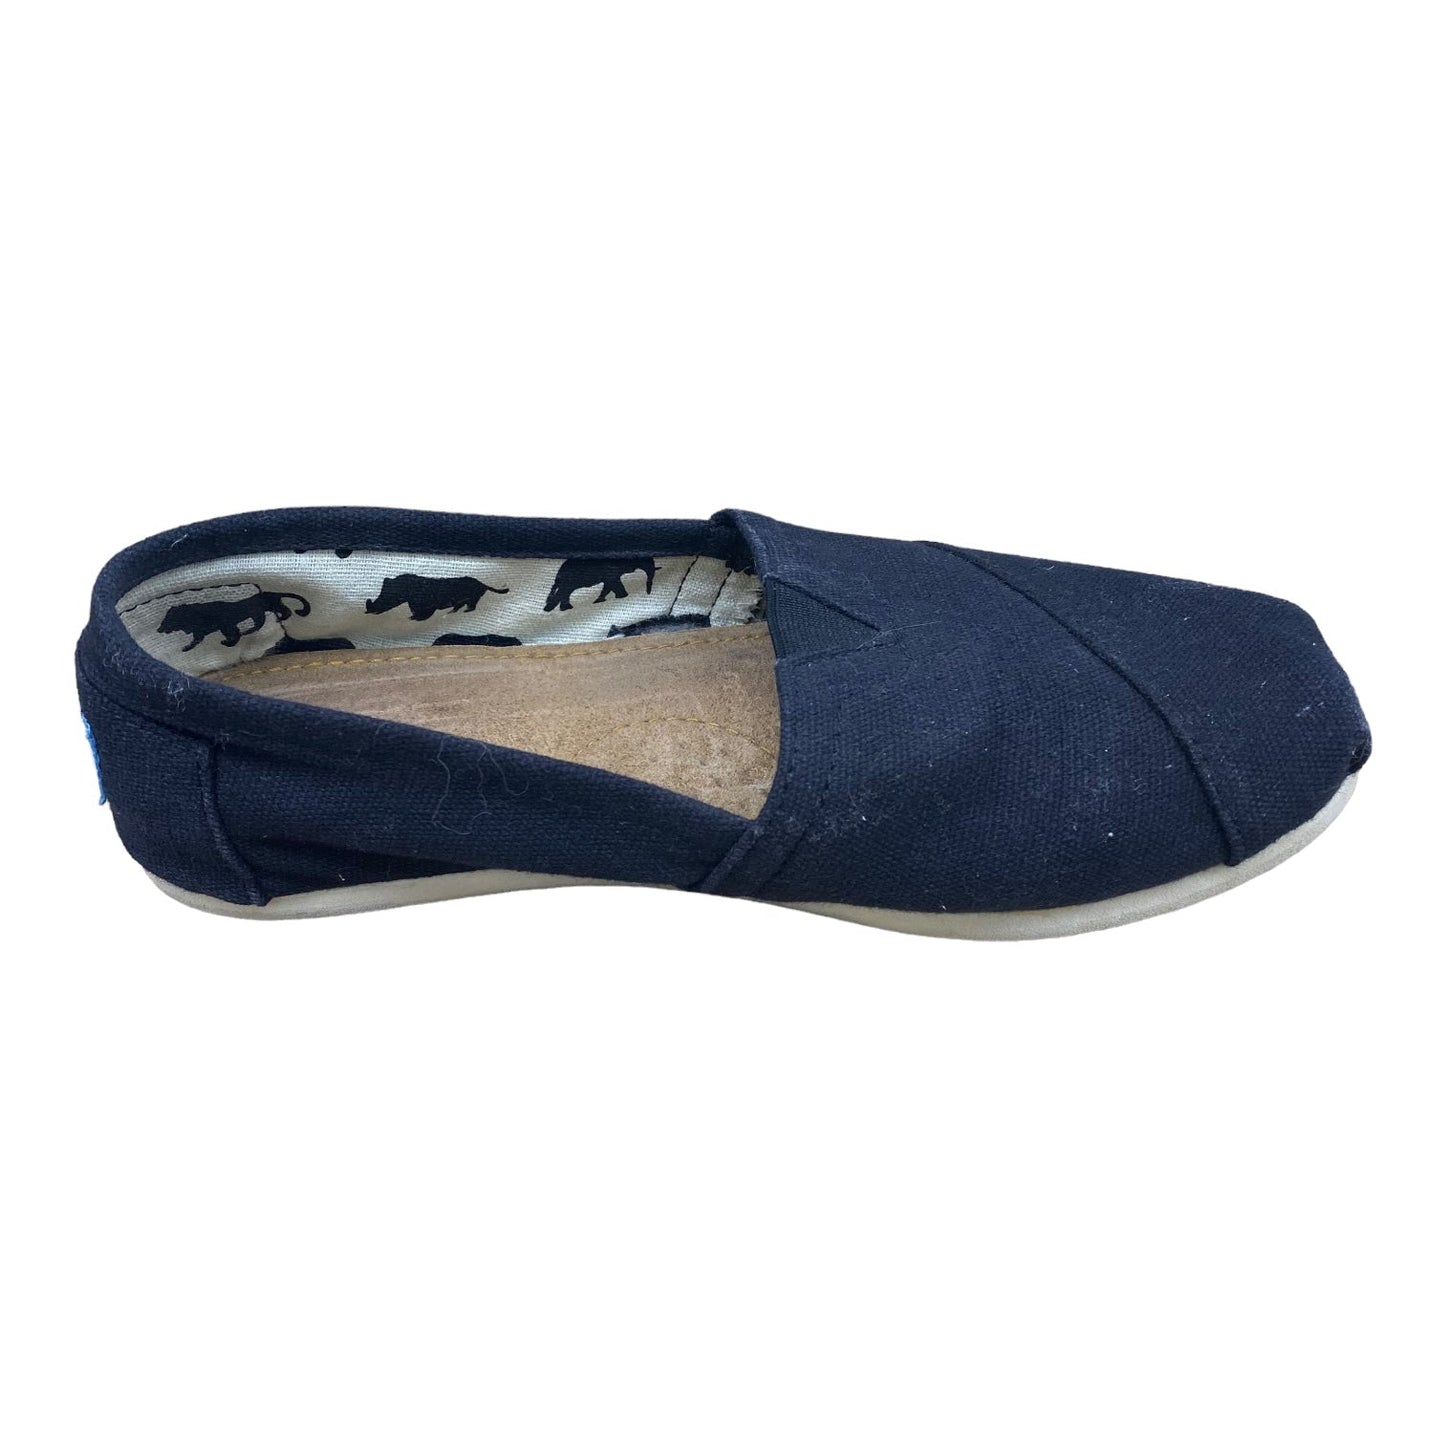 Shoes Flats By Toms  Size: 5.5